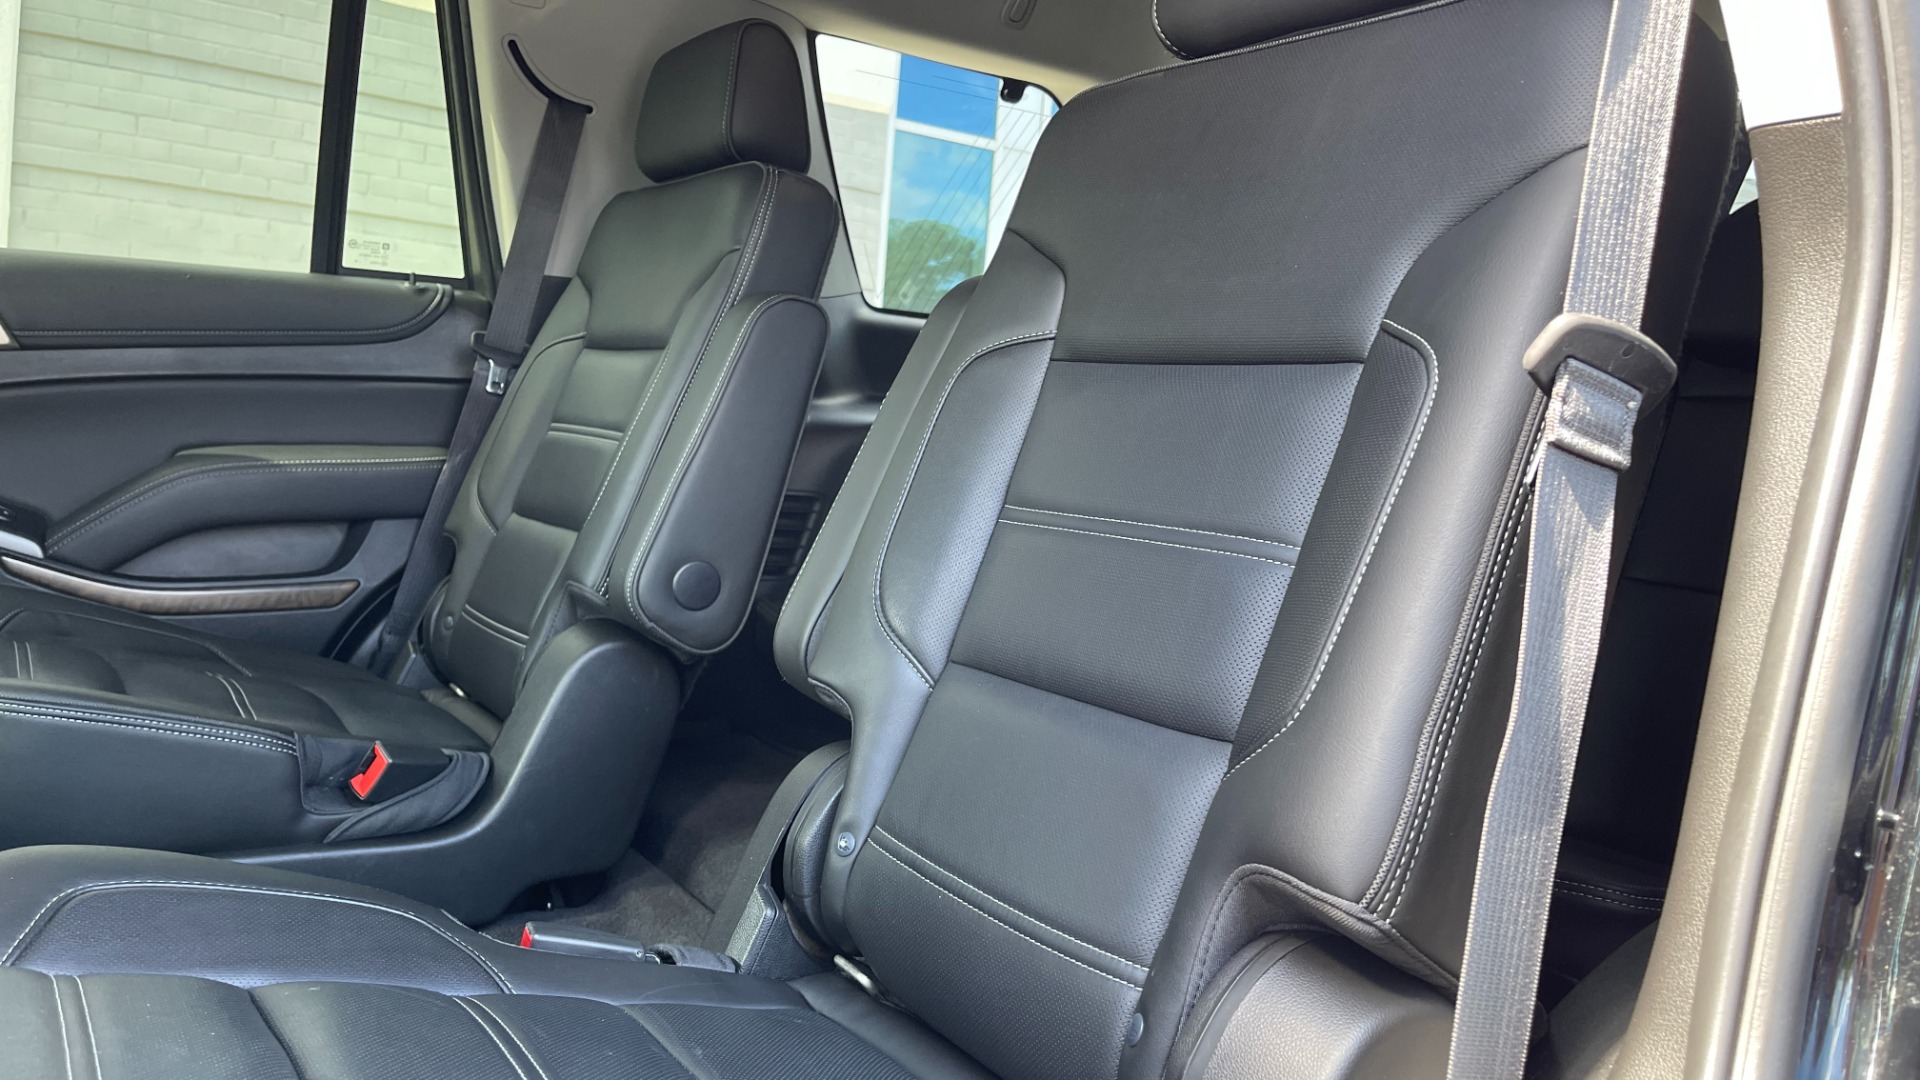 Used 2019 GMC Yukon DENALI / ULTIMATE PACKAGE / DVD / 4X4 / ADAPTIVE CRUISE / SUNROOF for sale $58,295 at Formula Imports in Charlotte NC 28227 18